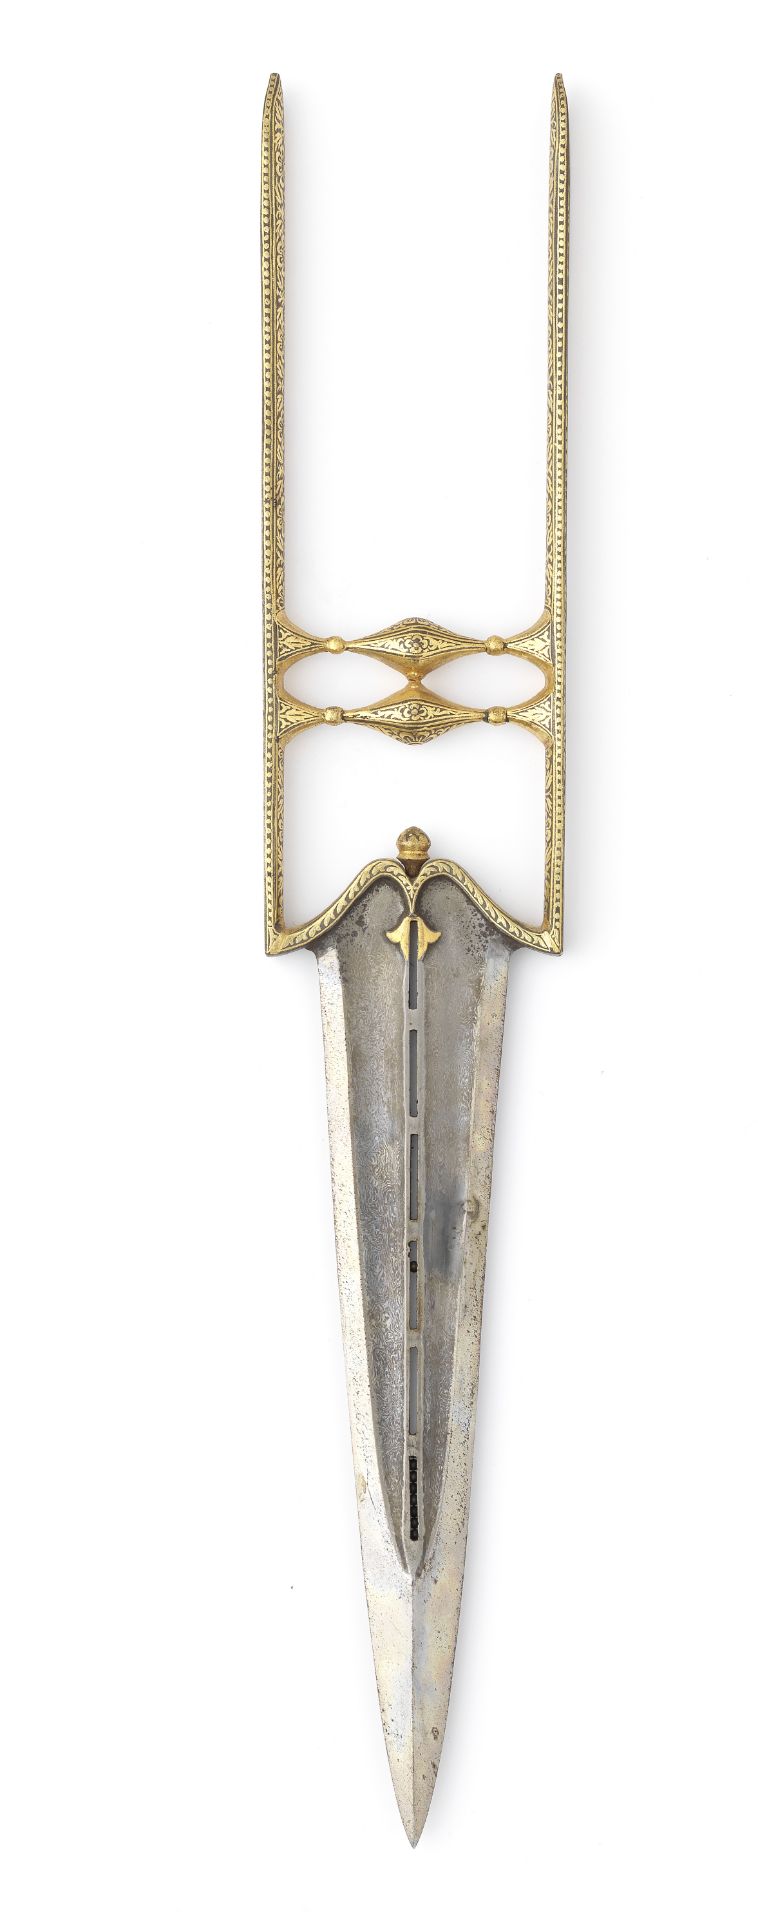 A gold damascened steel 'tears of the wounded' push dagger (katar) India, 18th Century